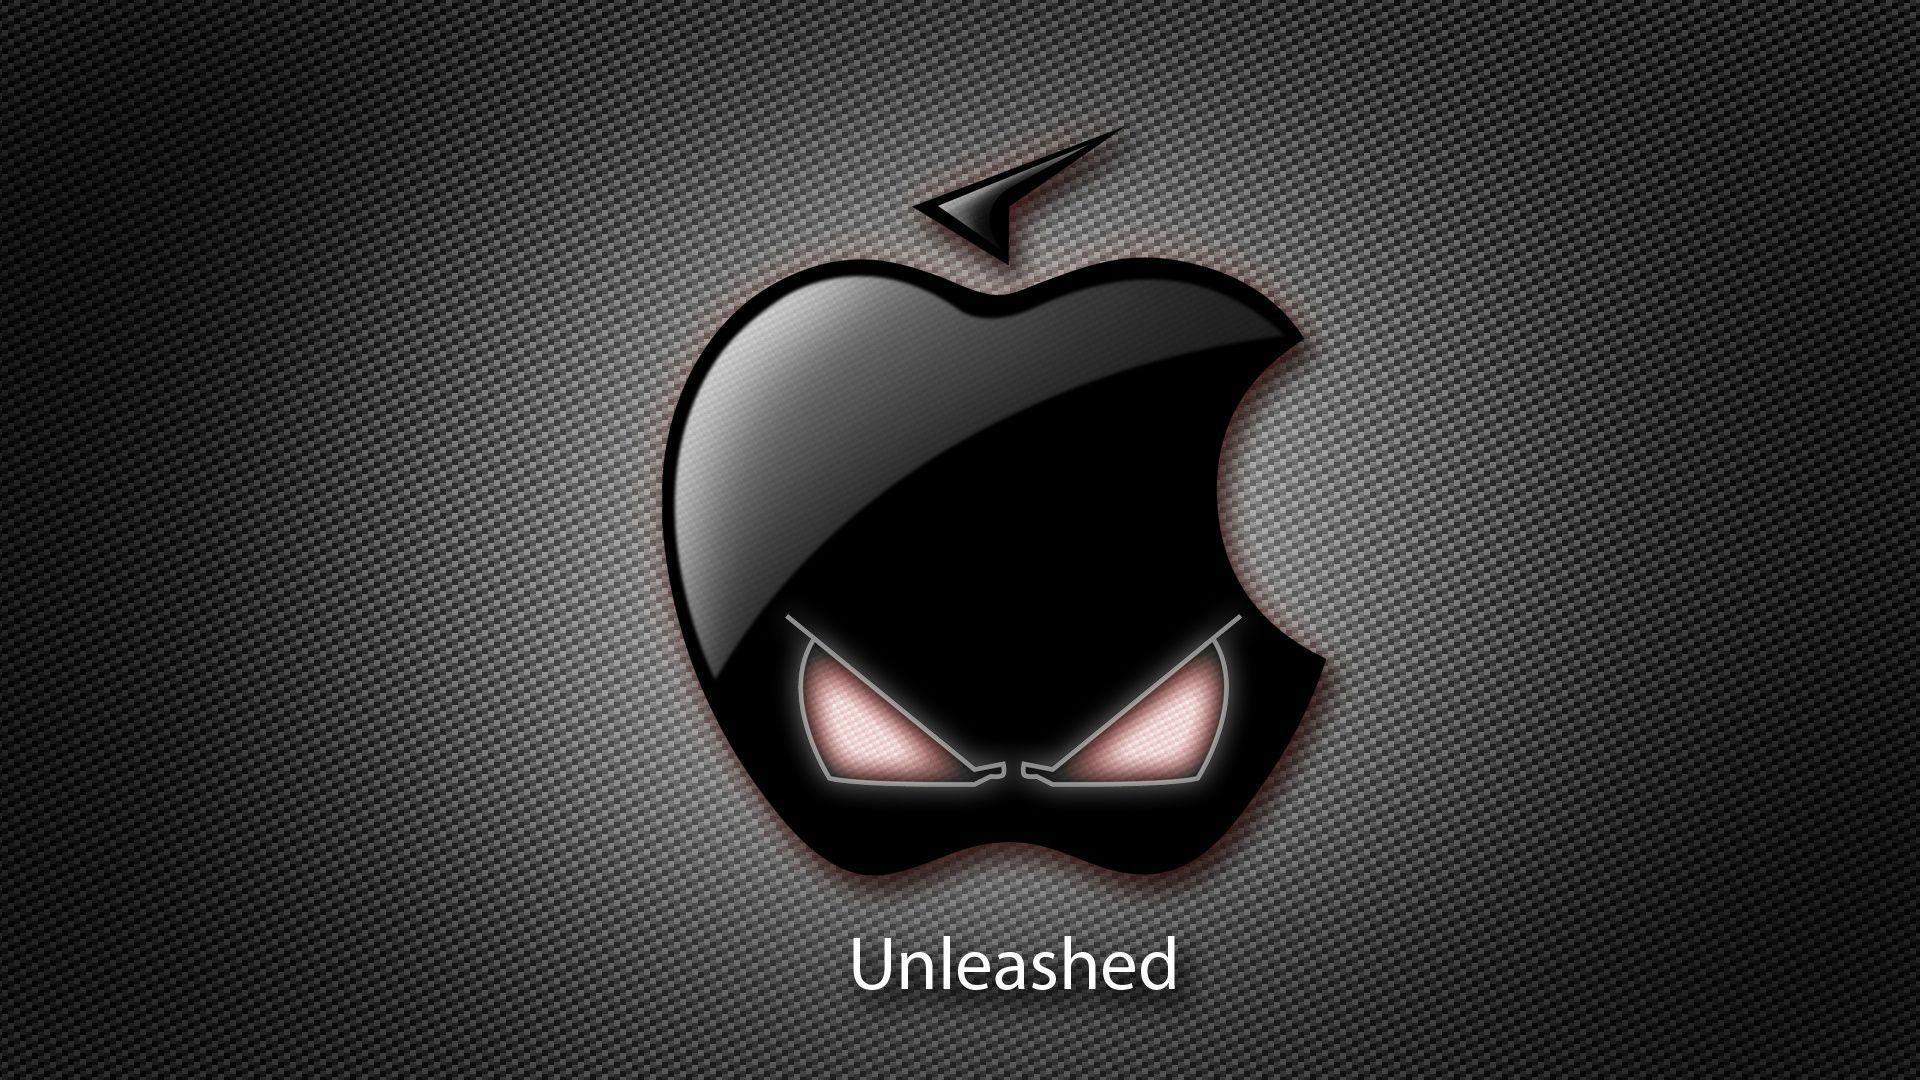 Apple Unleashed [1920x1080] gonna use this on my Hacked copy